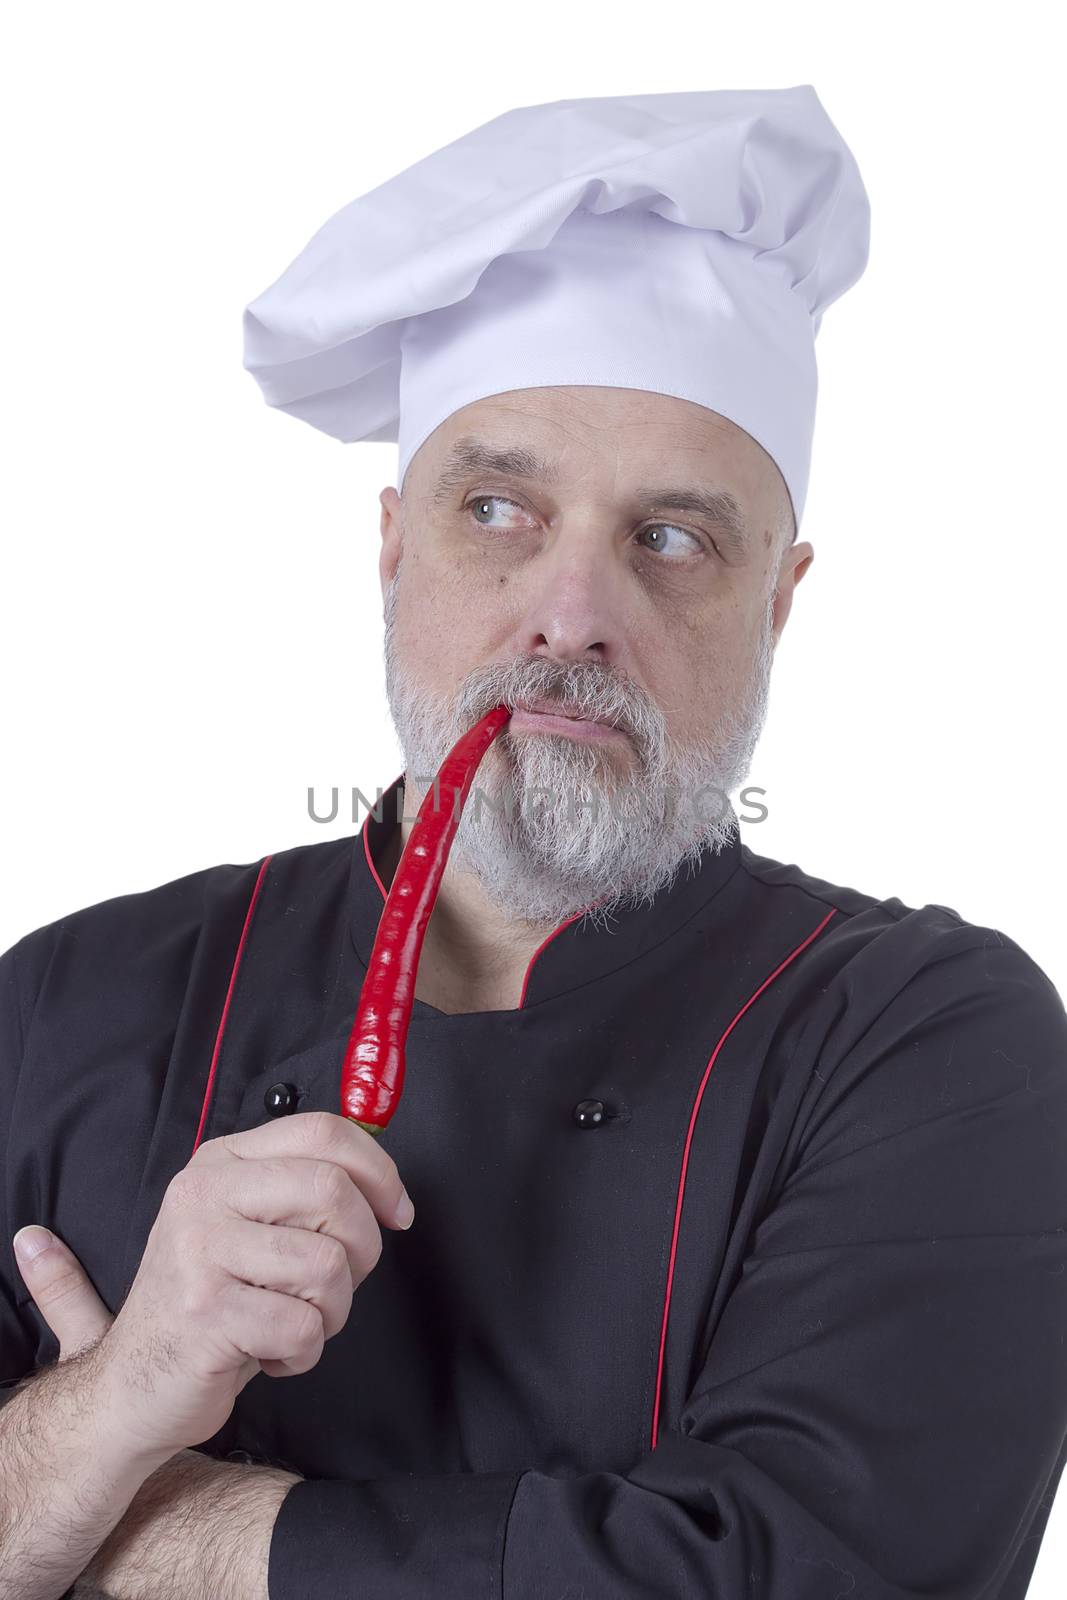 Bearded chef biting hot chili pepper on a white background